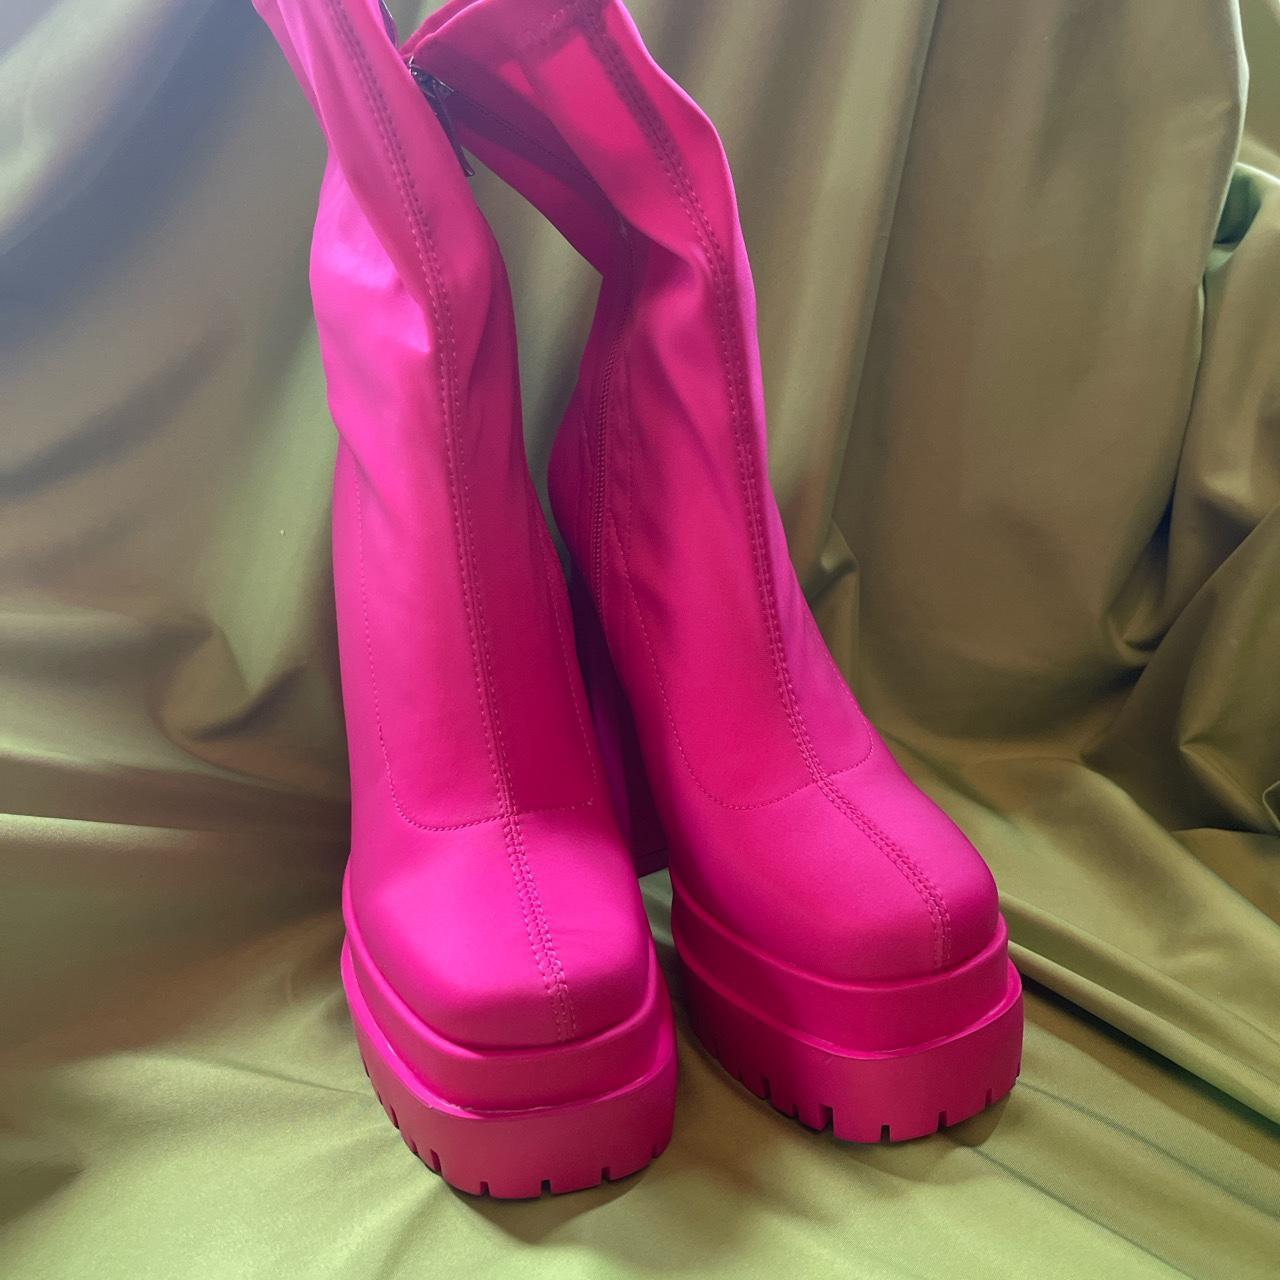 Hot pink size 7.5 perfect condition boots! - Depop